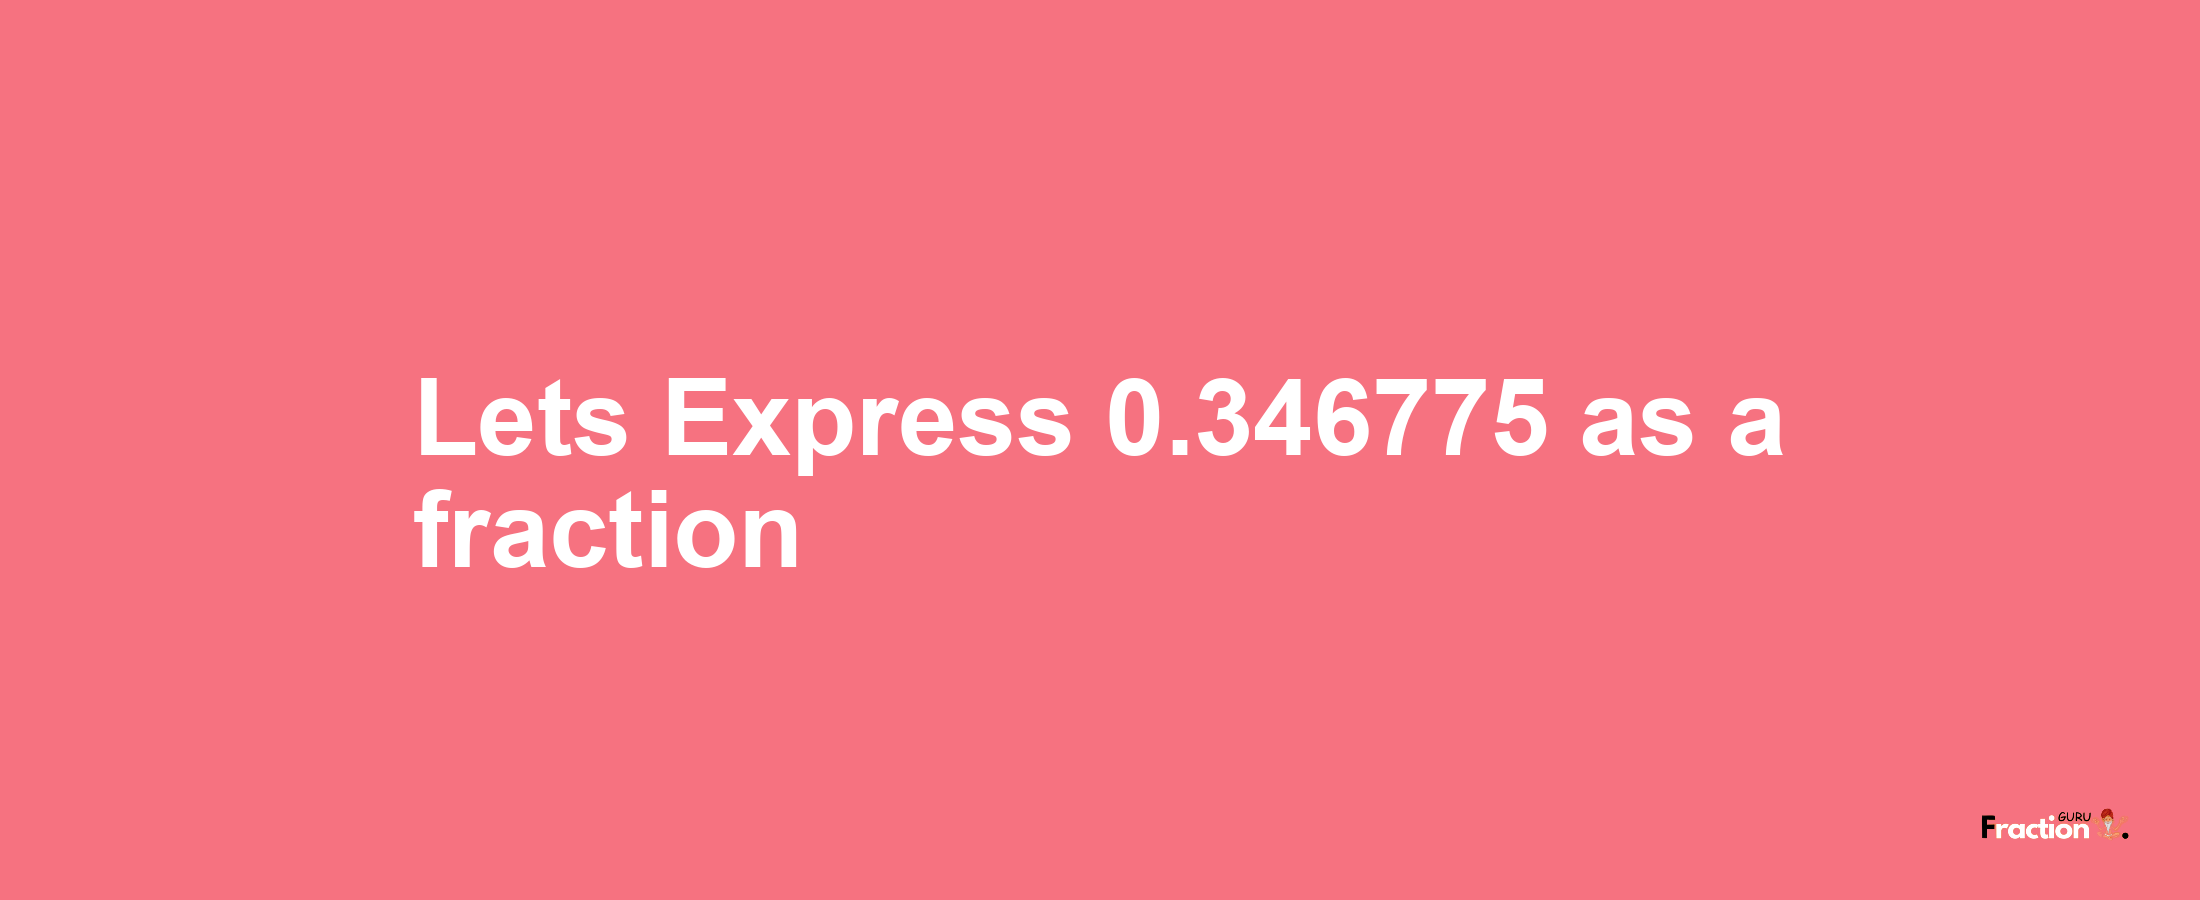 Lets Express 0.346775 as afraction